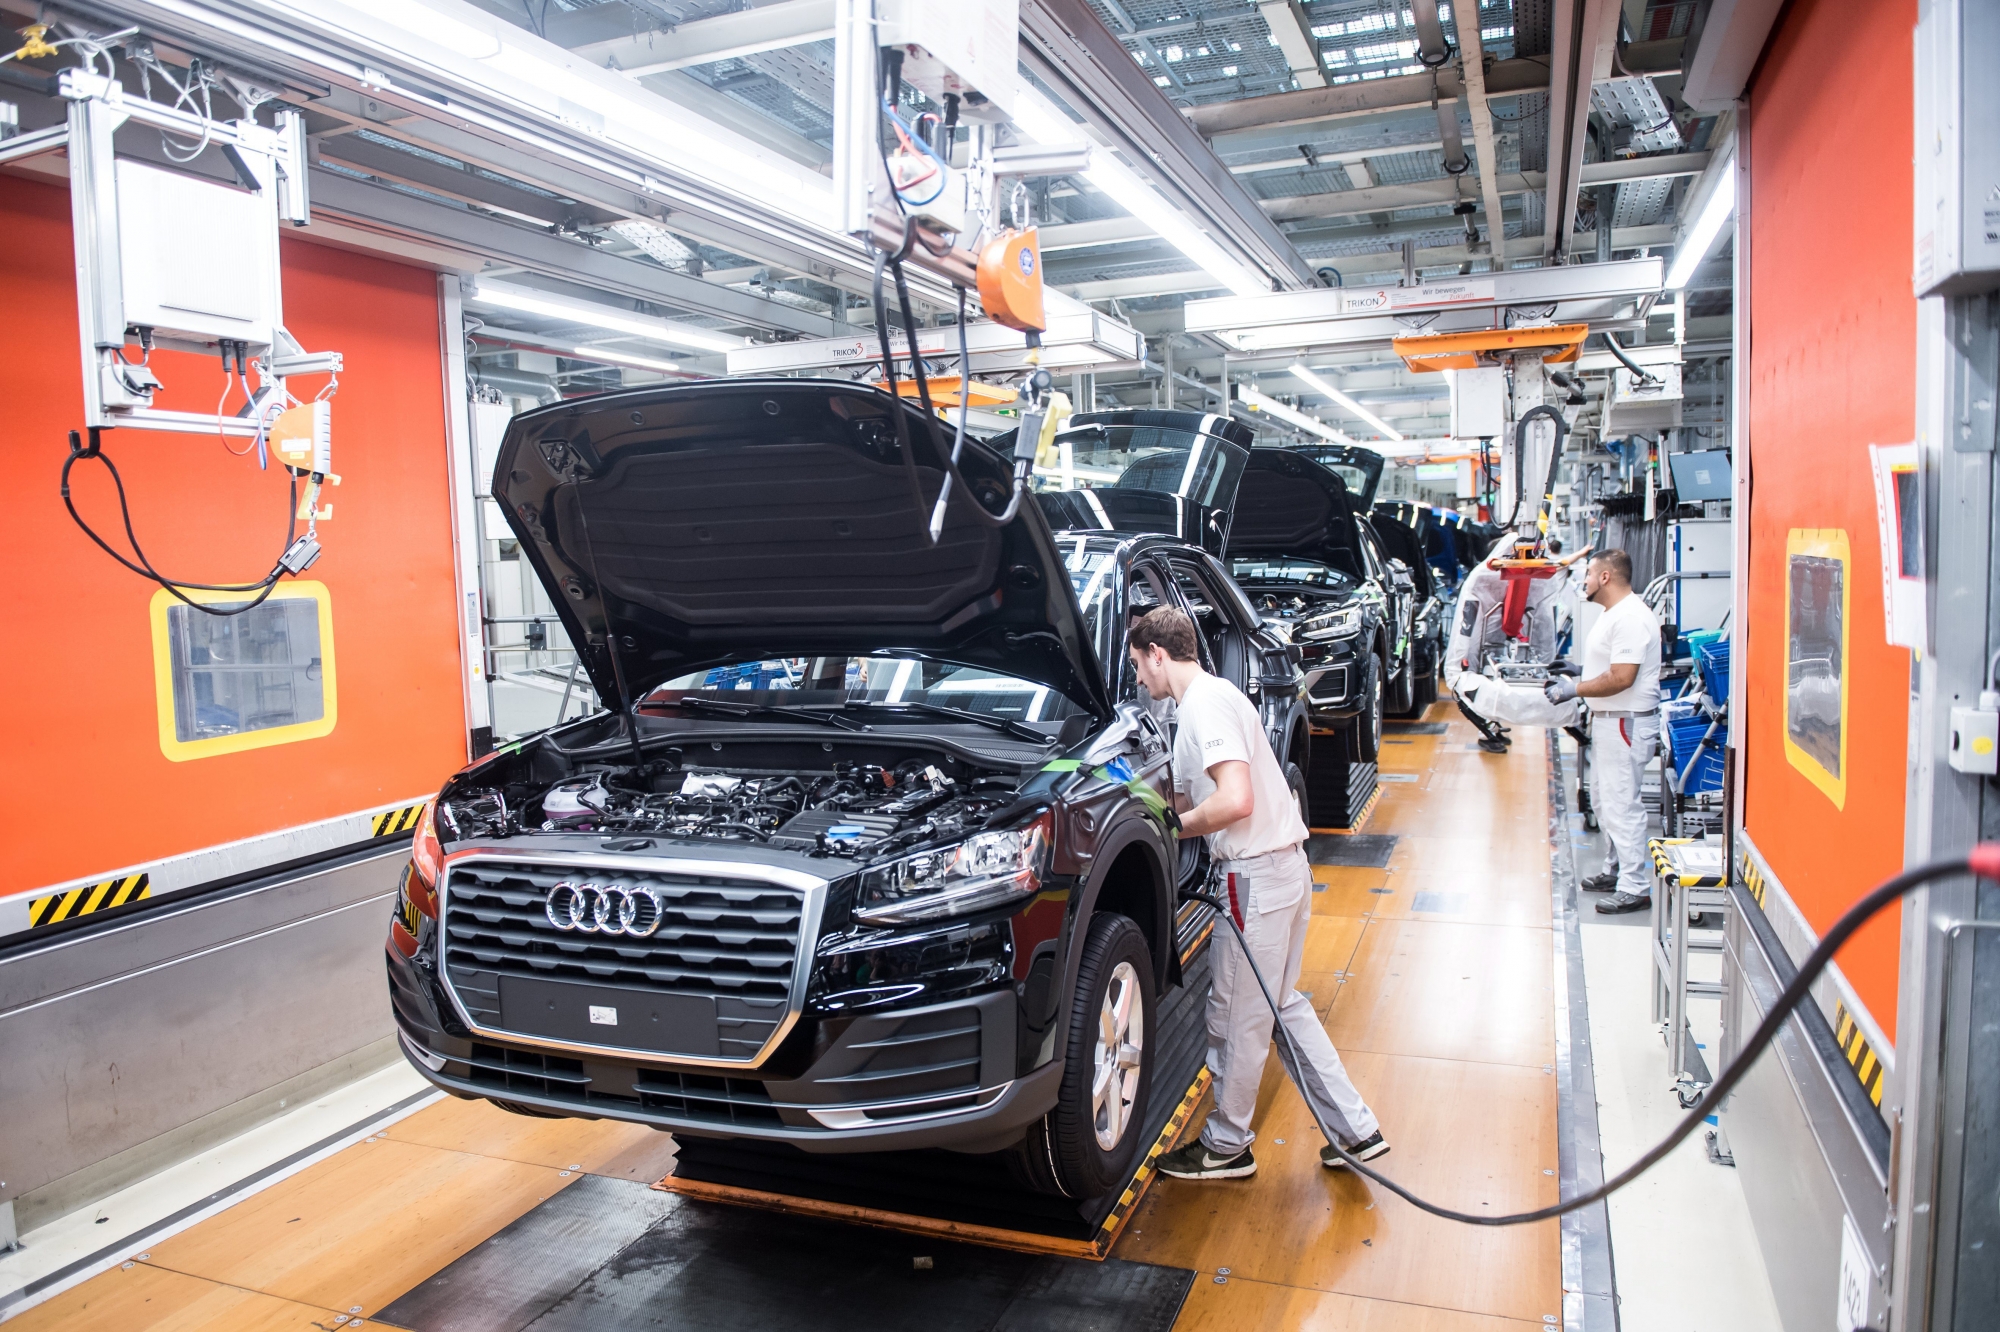 epa06604132 A worker assembles a front seat in a new Audi at the Audi A3 and Q2  production line of the German car manufacturer's plant in Ingolstadt, Bavaria, Germany, 14 March 2018. On the occasion of its Annual Press Conference on 15 March 2018, in Ingolstadt, Audi will present the key figures for the year 2017 and provides an outlook for the year 2018.  EPA/LUKAS BARTH GERMANY AUDI ANNUAL PRESS CONFERENCE